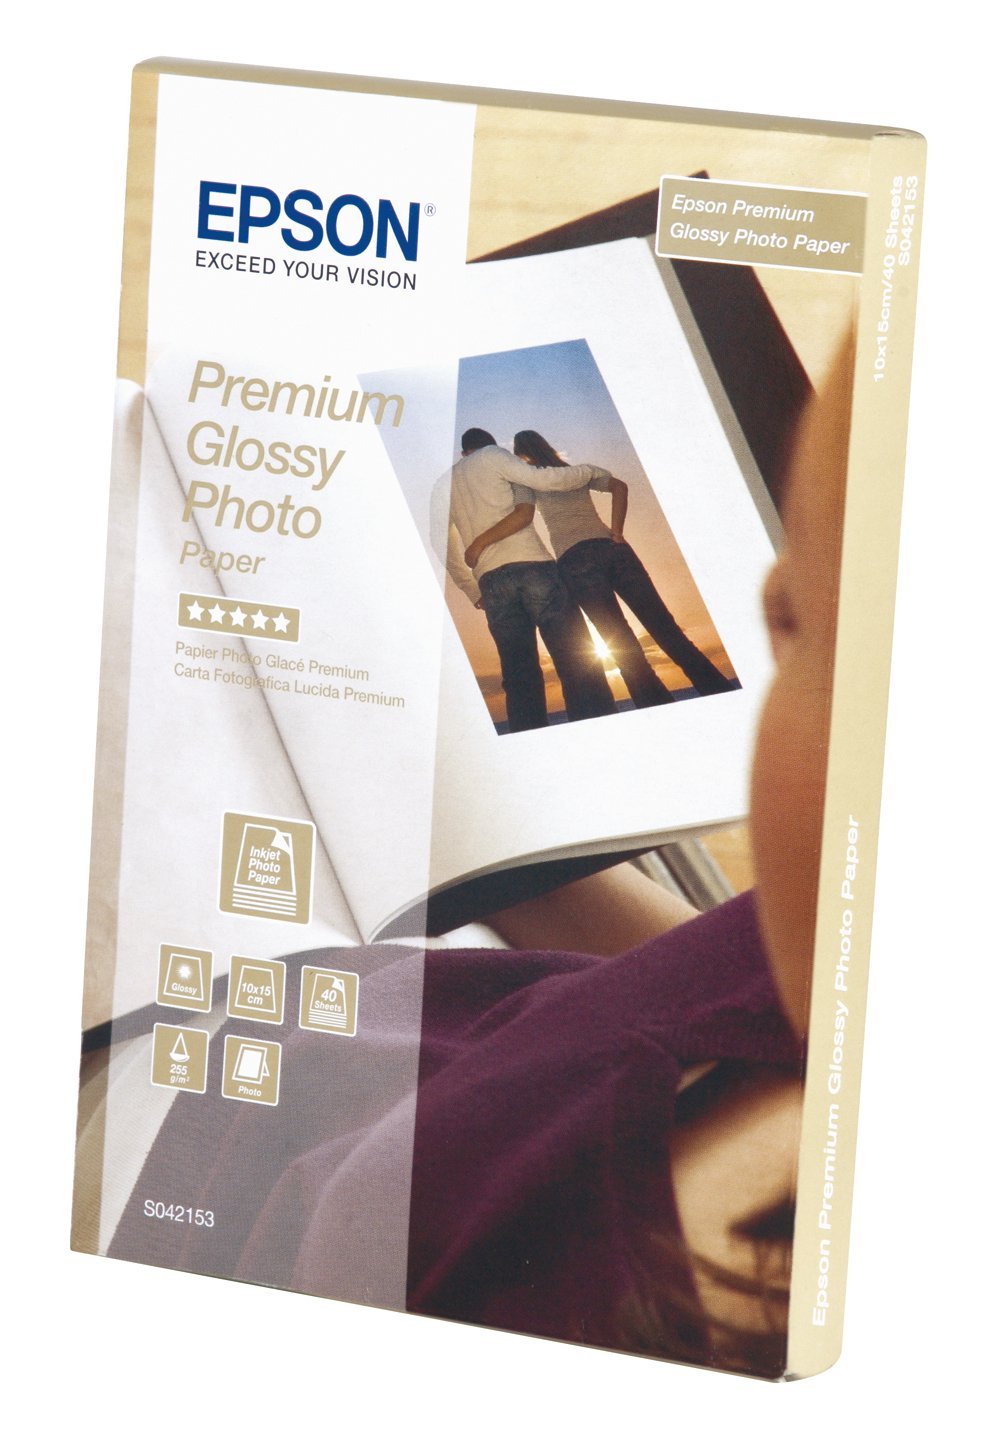 Epson C13S042153 Glossy Photo Paper 10x15cm 40 Sheets